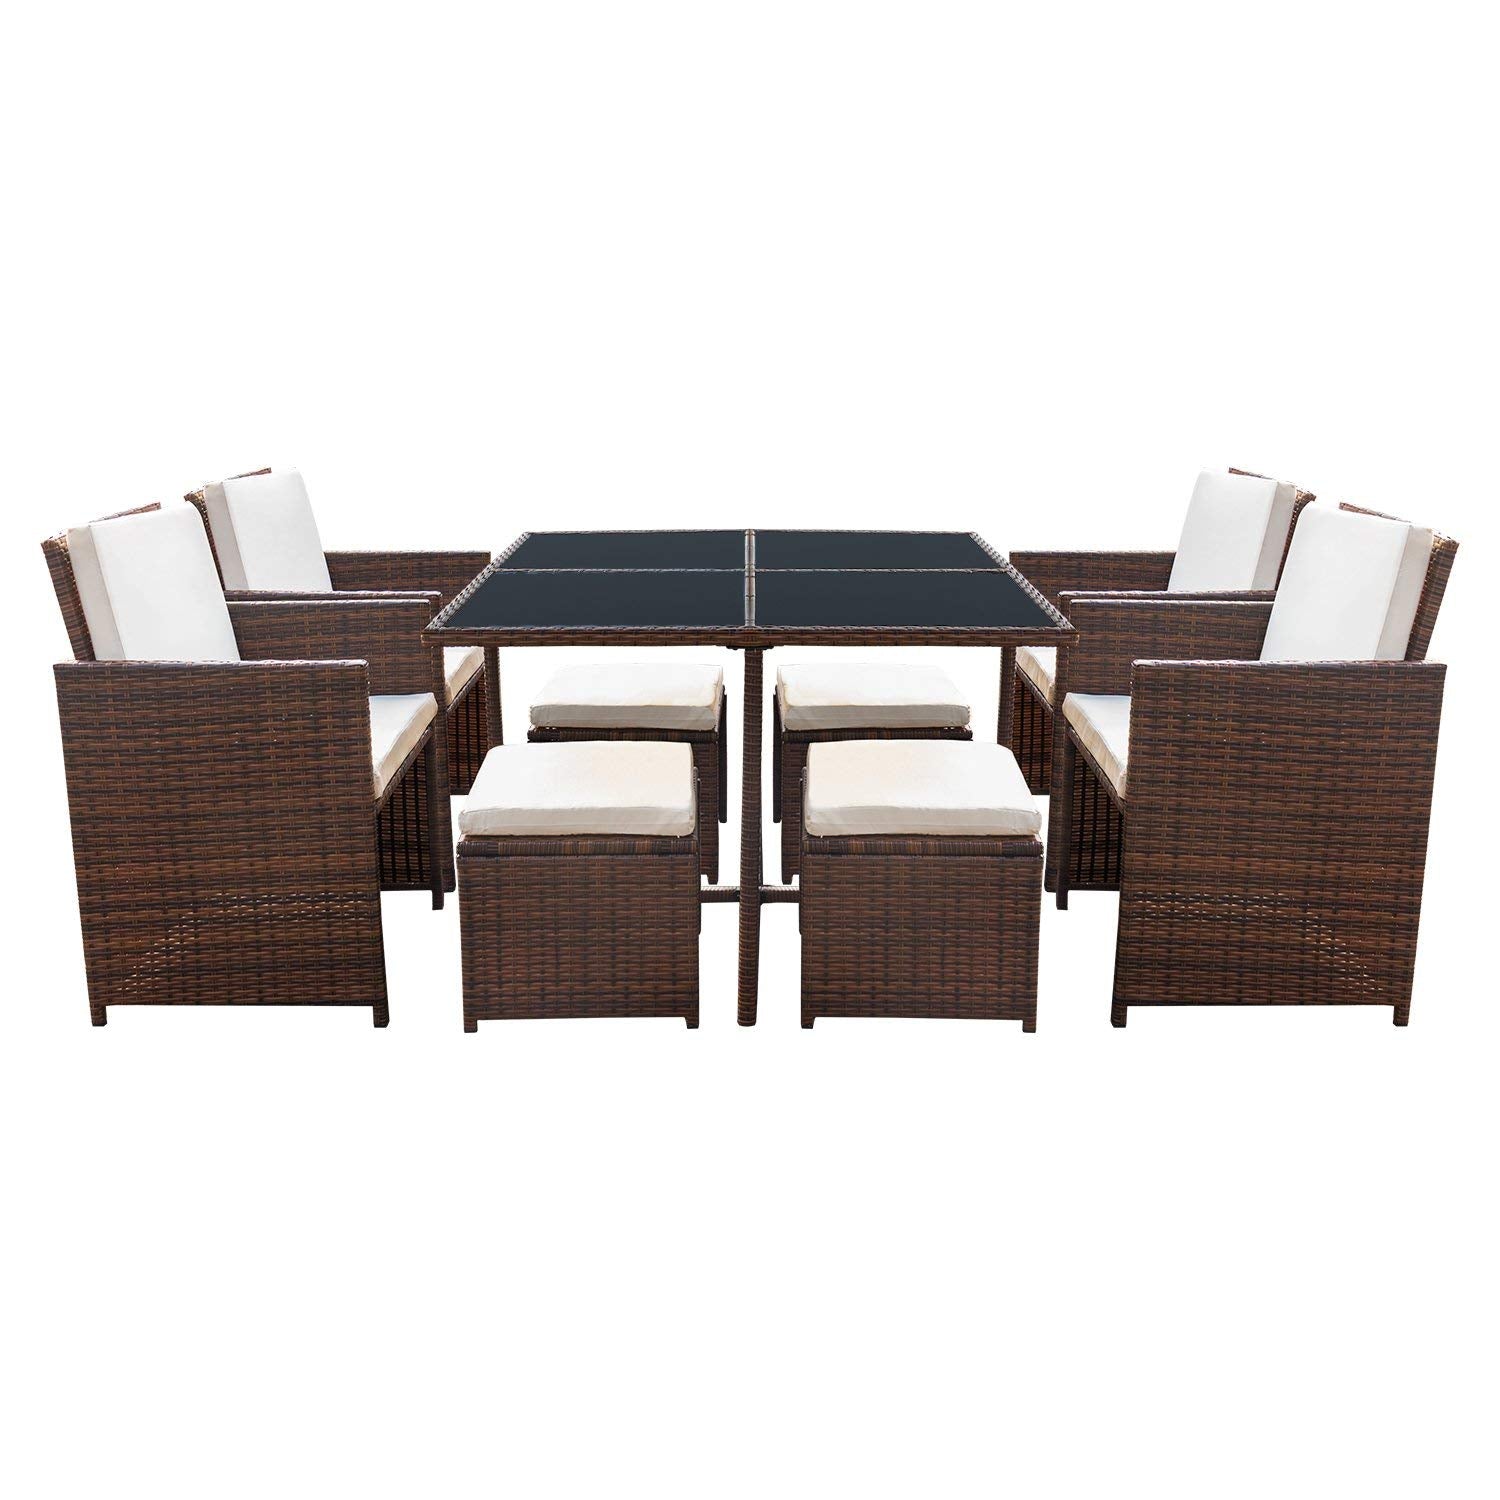 Devoko 9 Pieces Patio Dining Sets Outdoor Space Saving Rattan Chairs with Glass Table Patio Furniture Sets Cushioned Seating and Back Sectional Conversation Set (Brown)